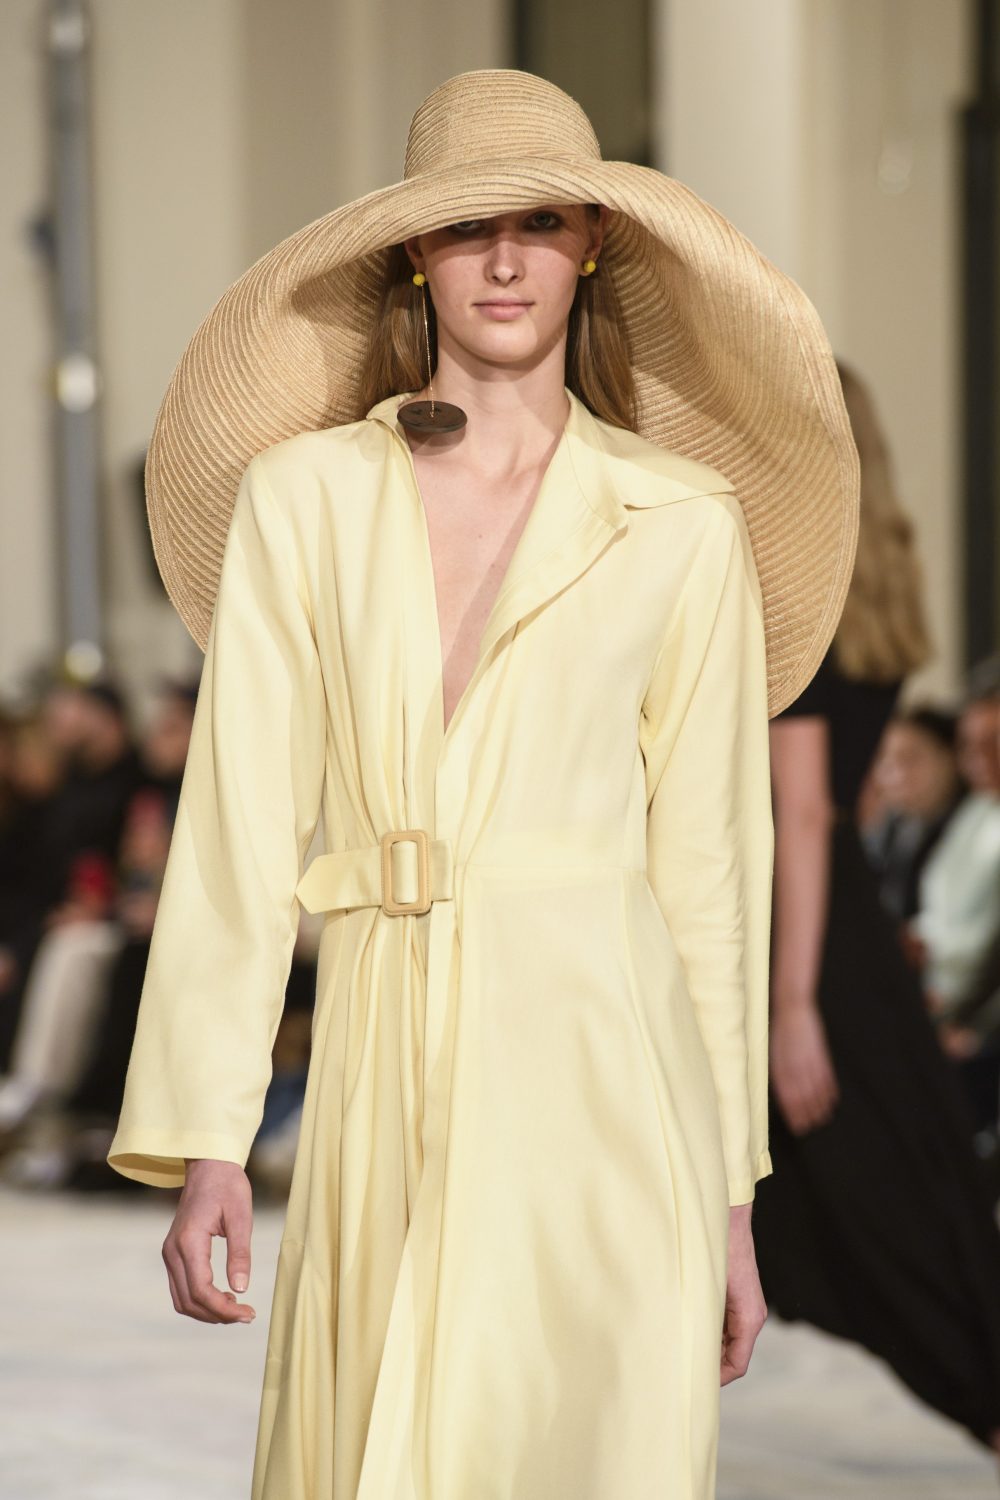 Oversized Hats Are Big News | Fashion Trends | MOJEH Magazine